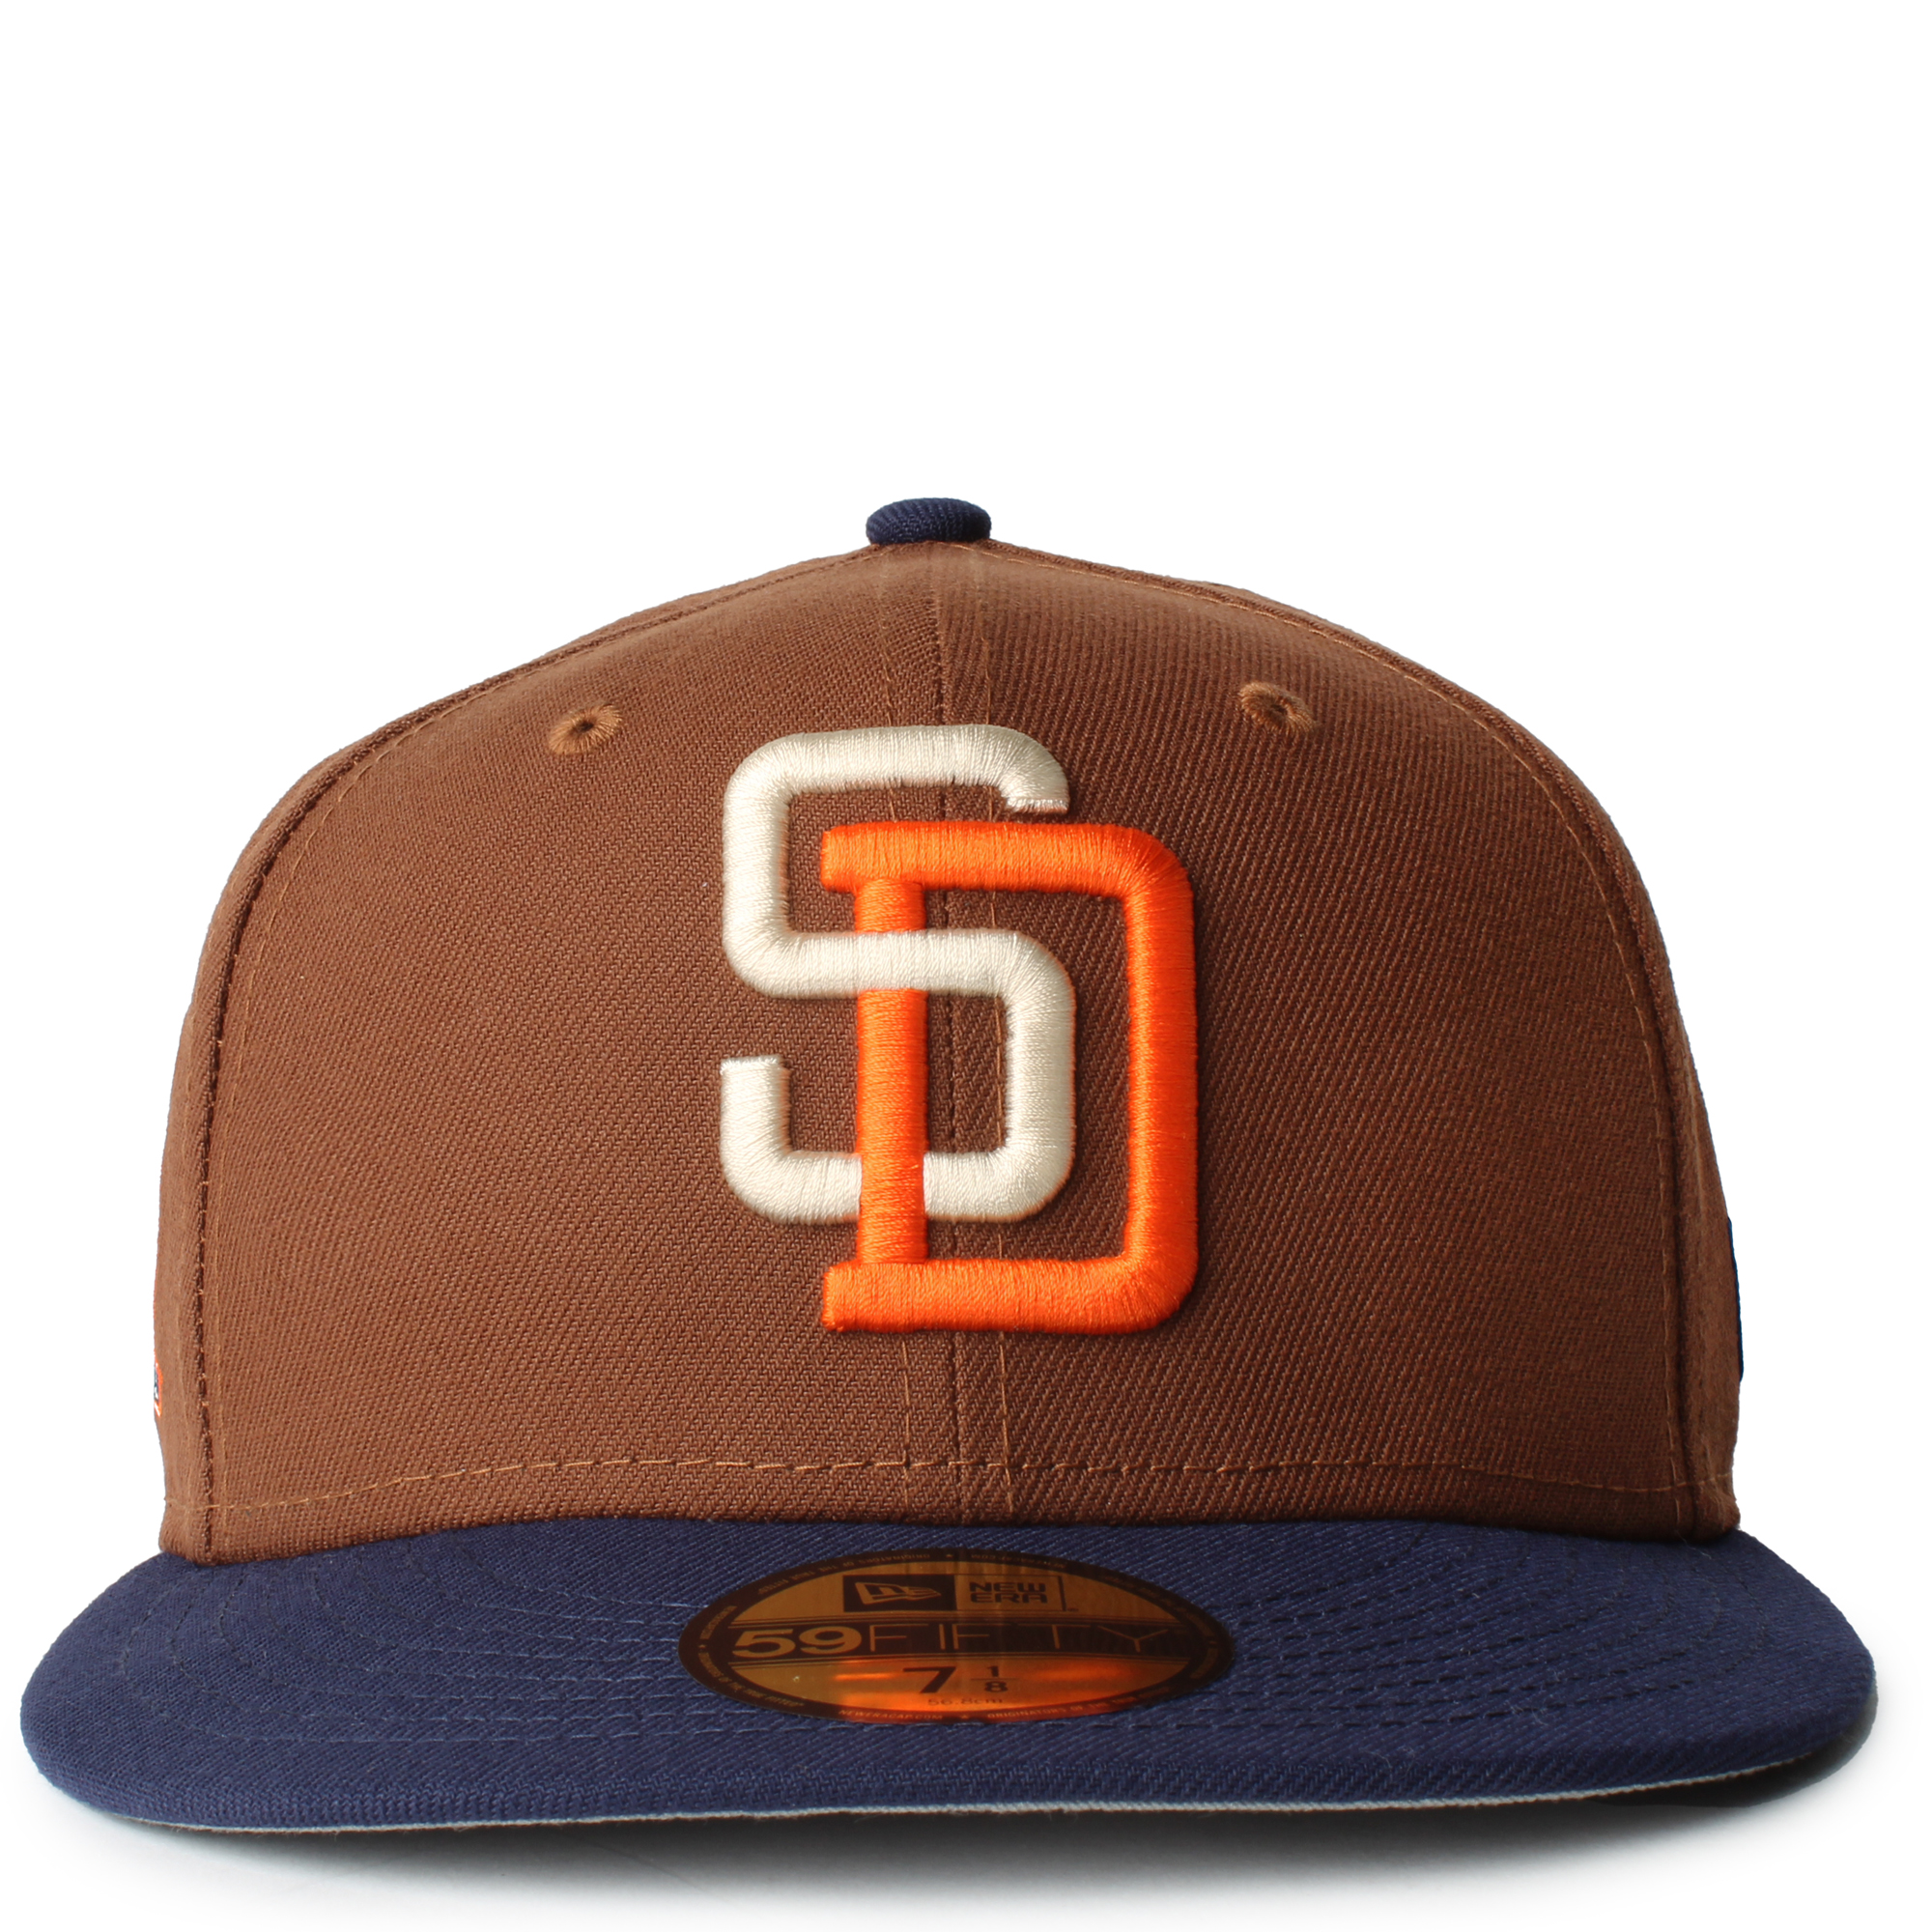 NEW ERA CAPS San Diego Padres Harvest 59Fifty Fitted Hat 60426561 -  Karmaloop